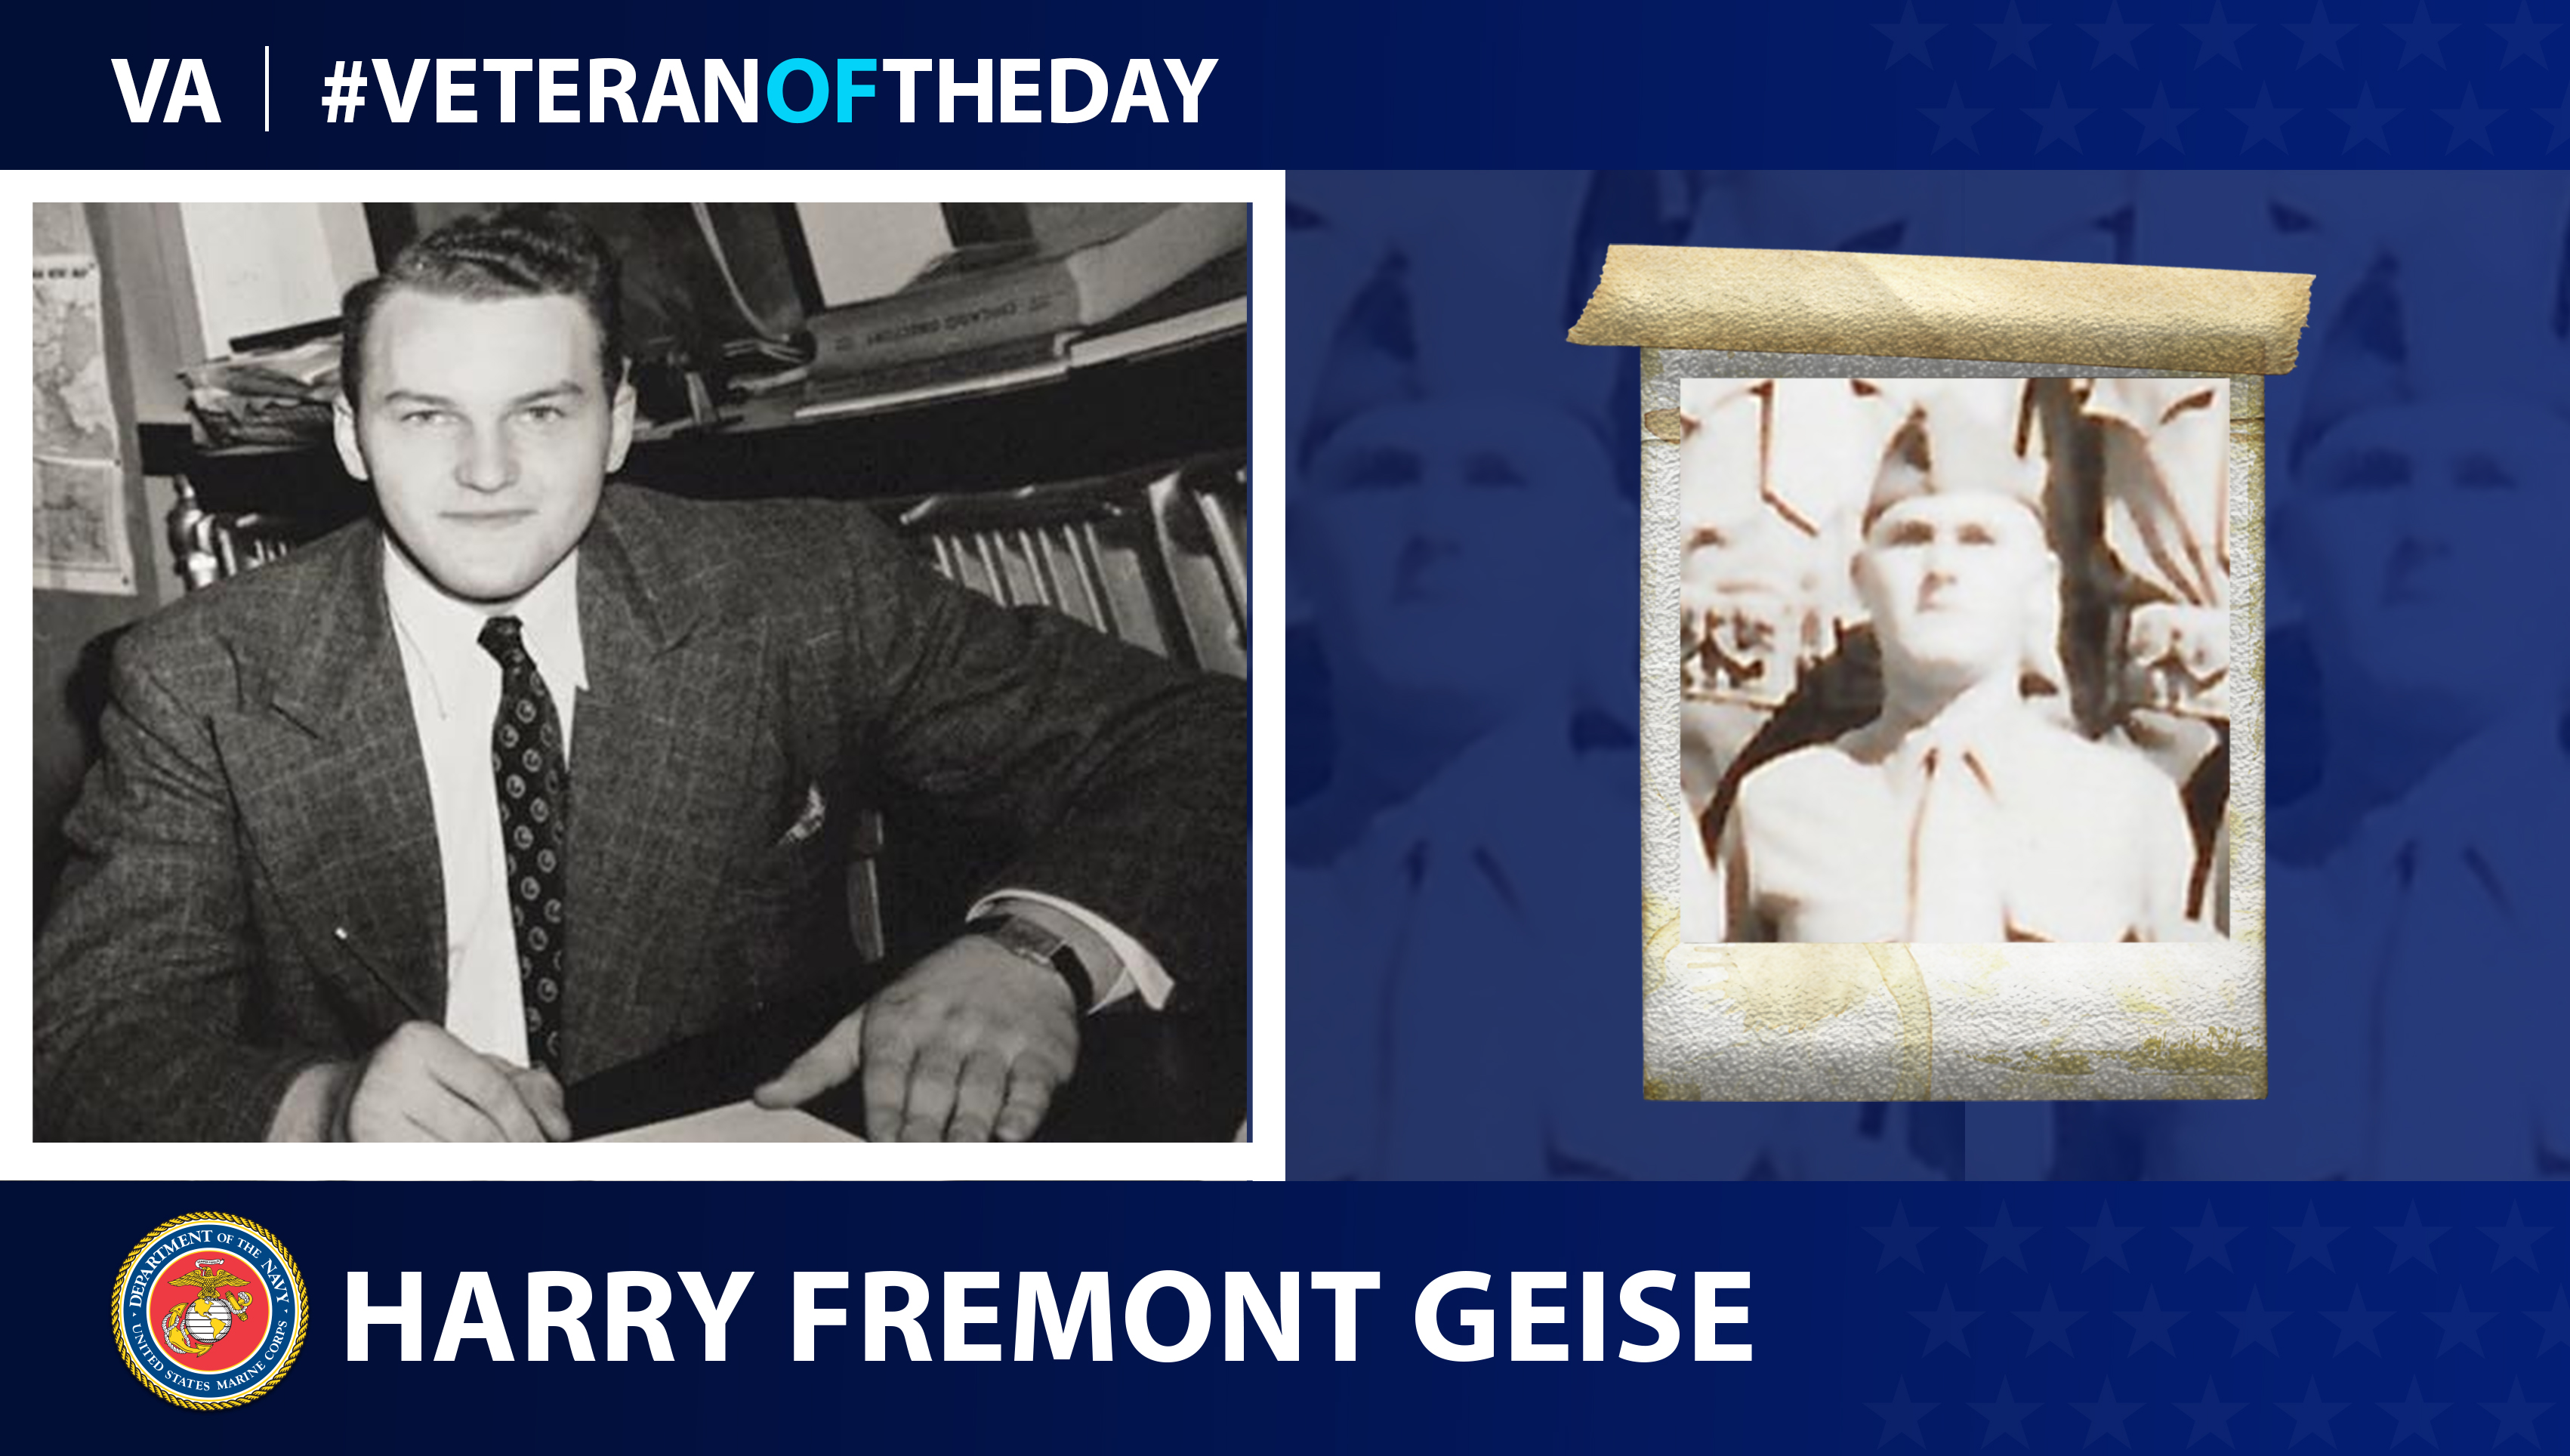 Marine Corps Veteran Harry Fermont Geise is today's Veteran of the Day.